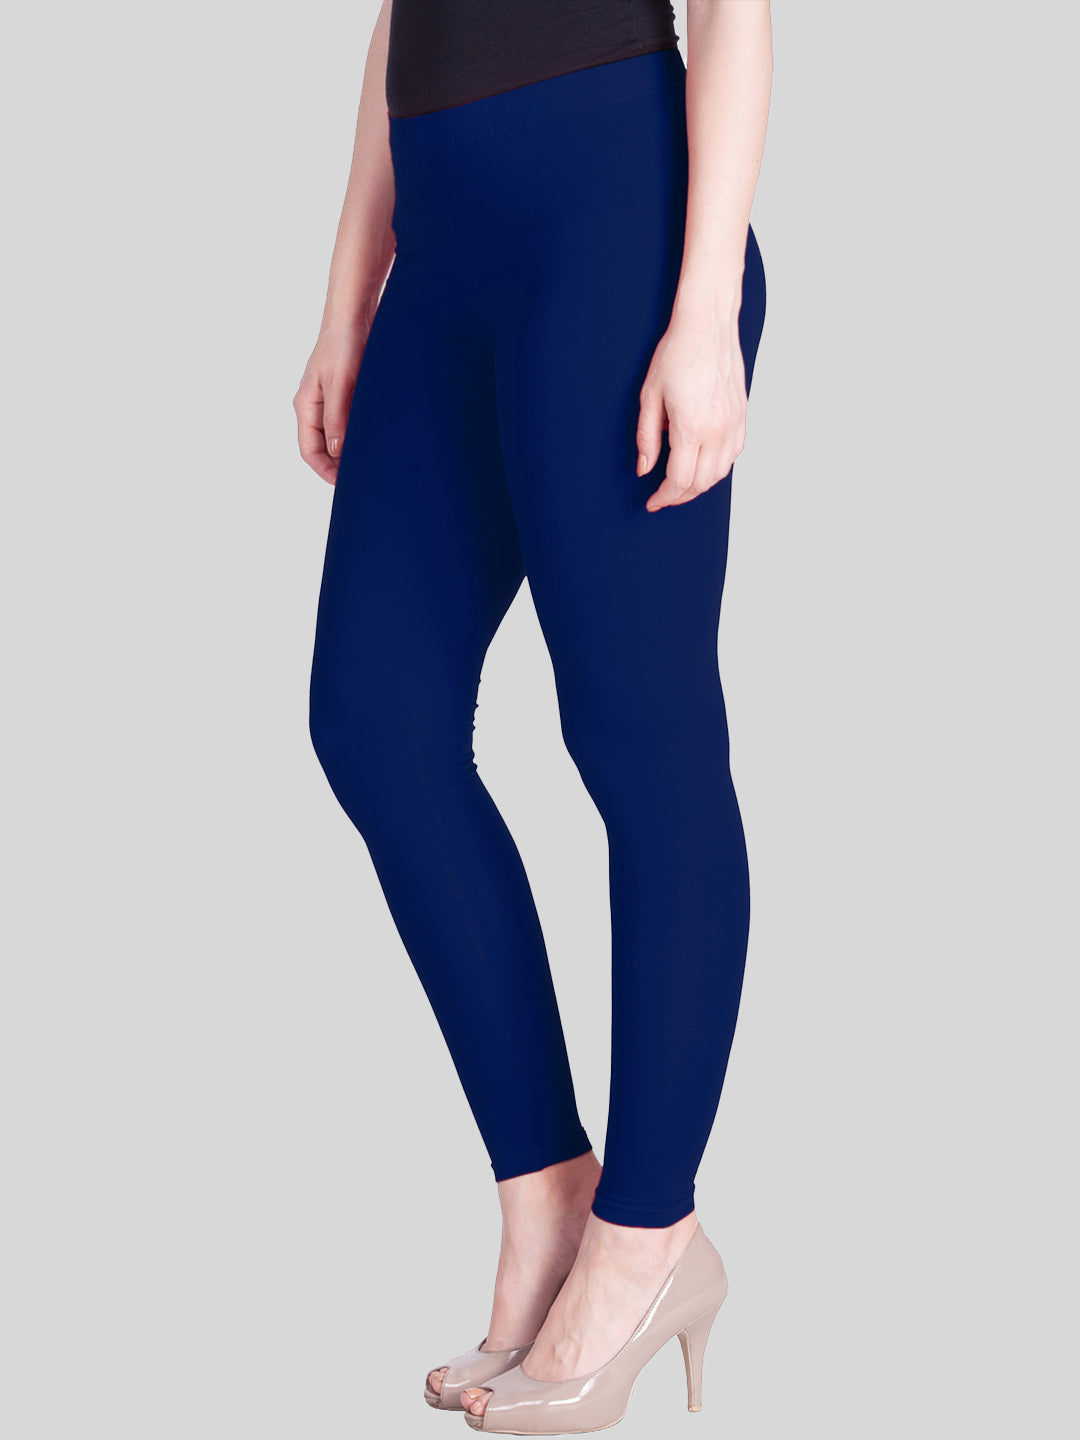 Go Colors Leggings Price In India | International Society of Precision  Agriculture